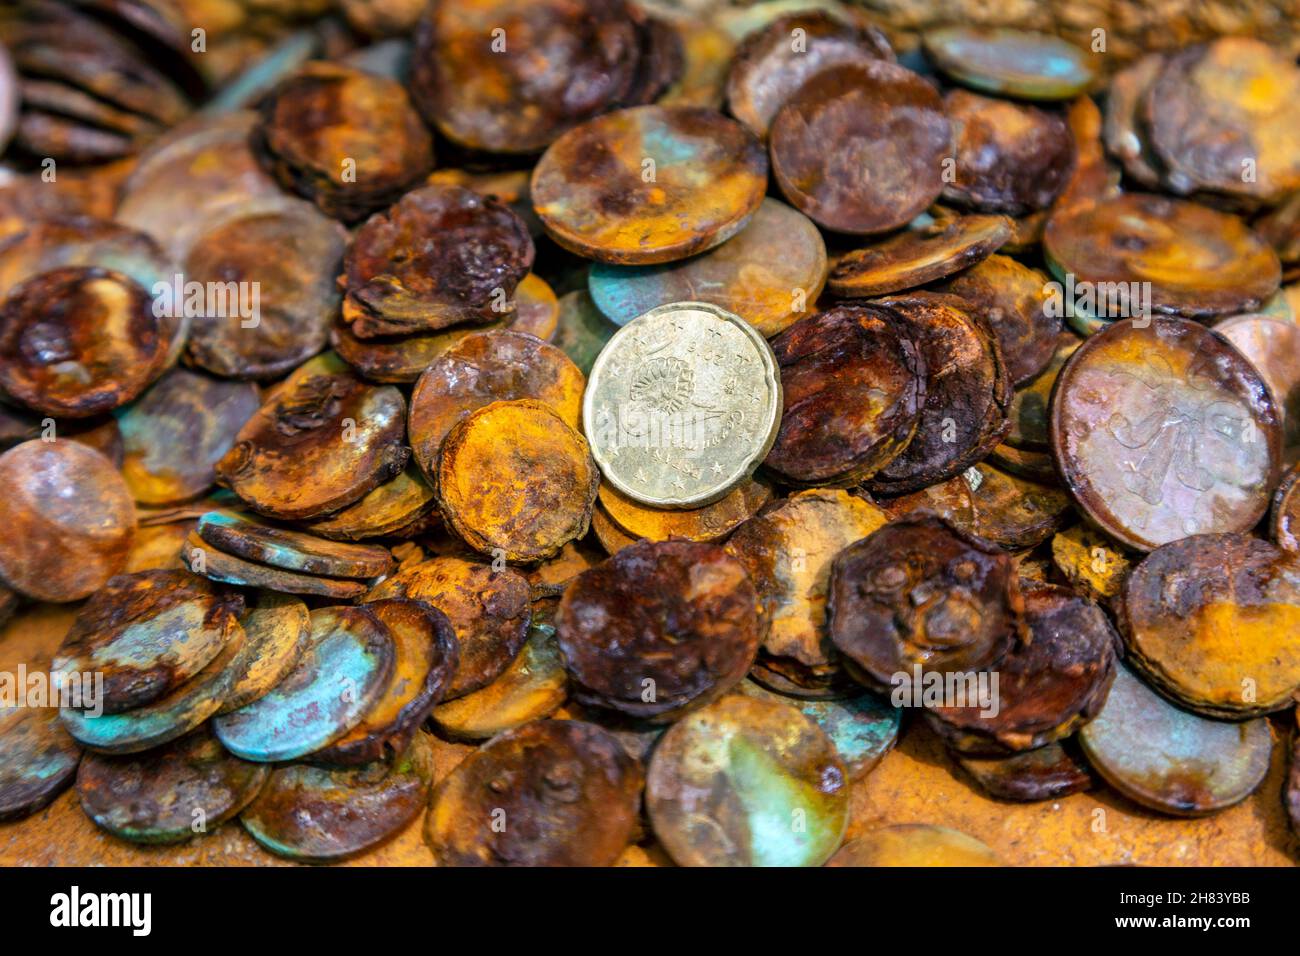 Corroded coins left at cross commemorating death of David Wordsworth Watson who fell from Carn Mellyn cliffs in 1873 near Lamorna Cove, Cornwall, UK Stock Photo